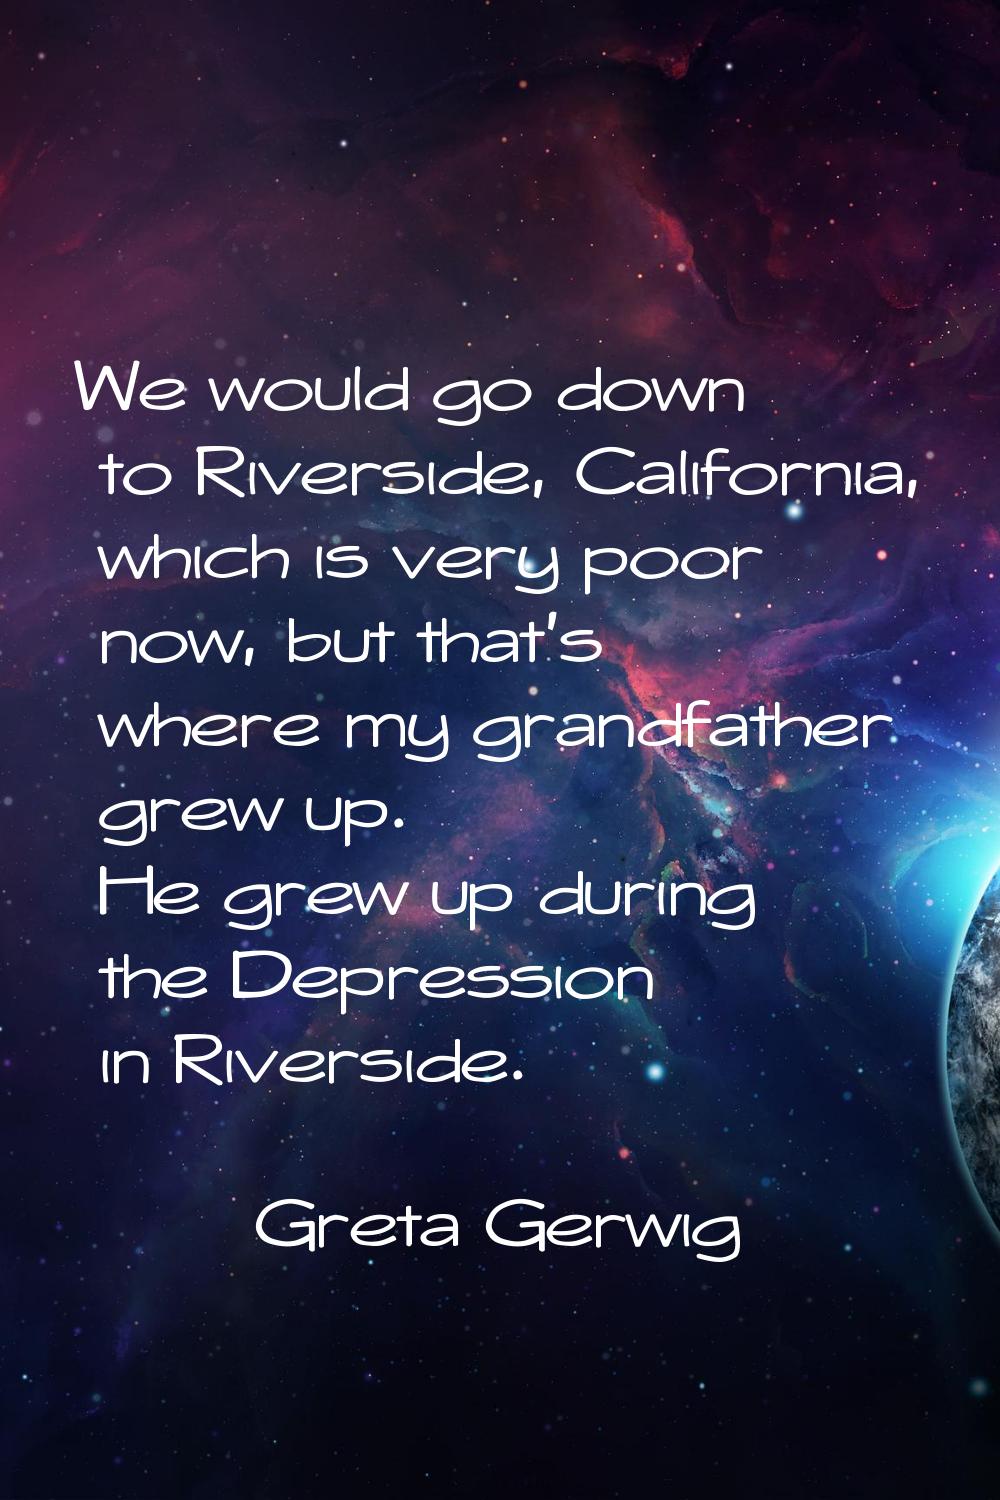 We would go down to Riverside, California, which is very poor now, but that's where my grandfather 